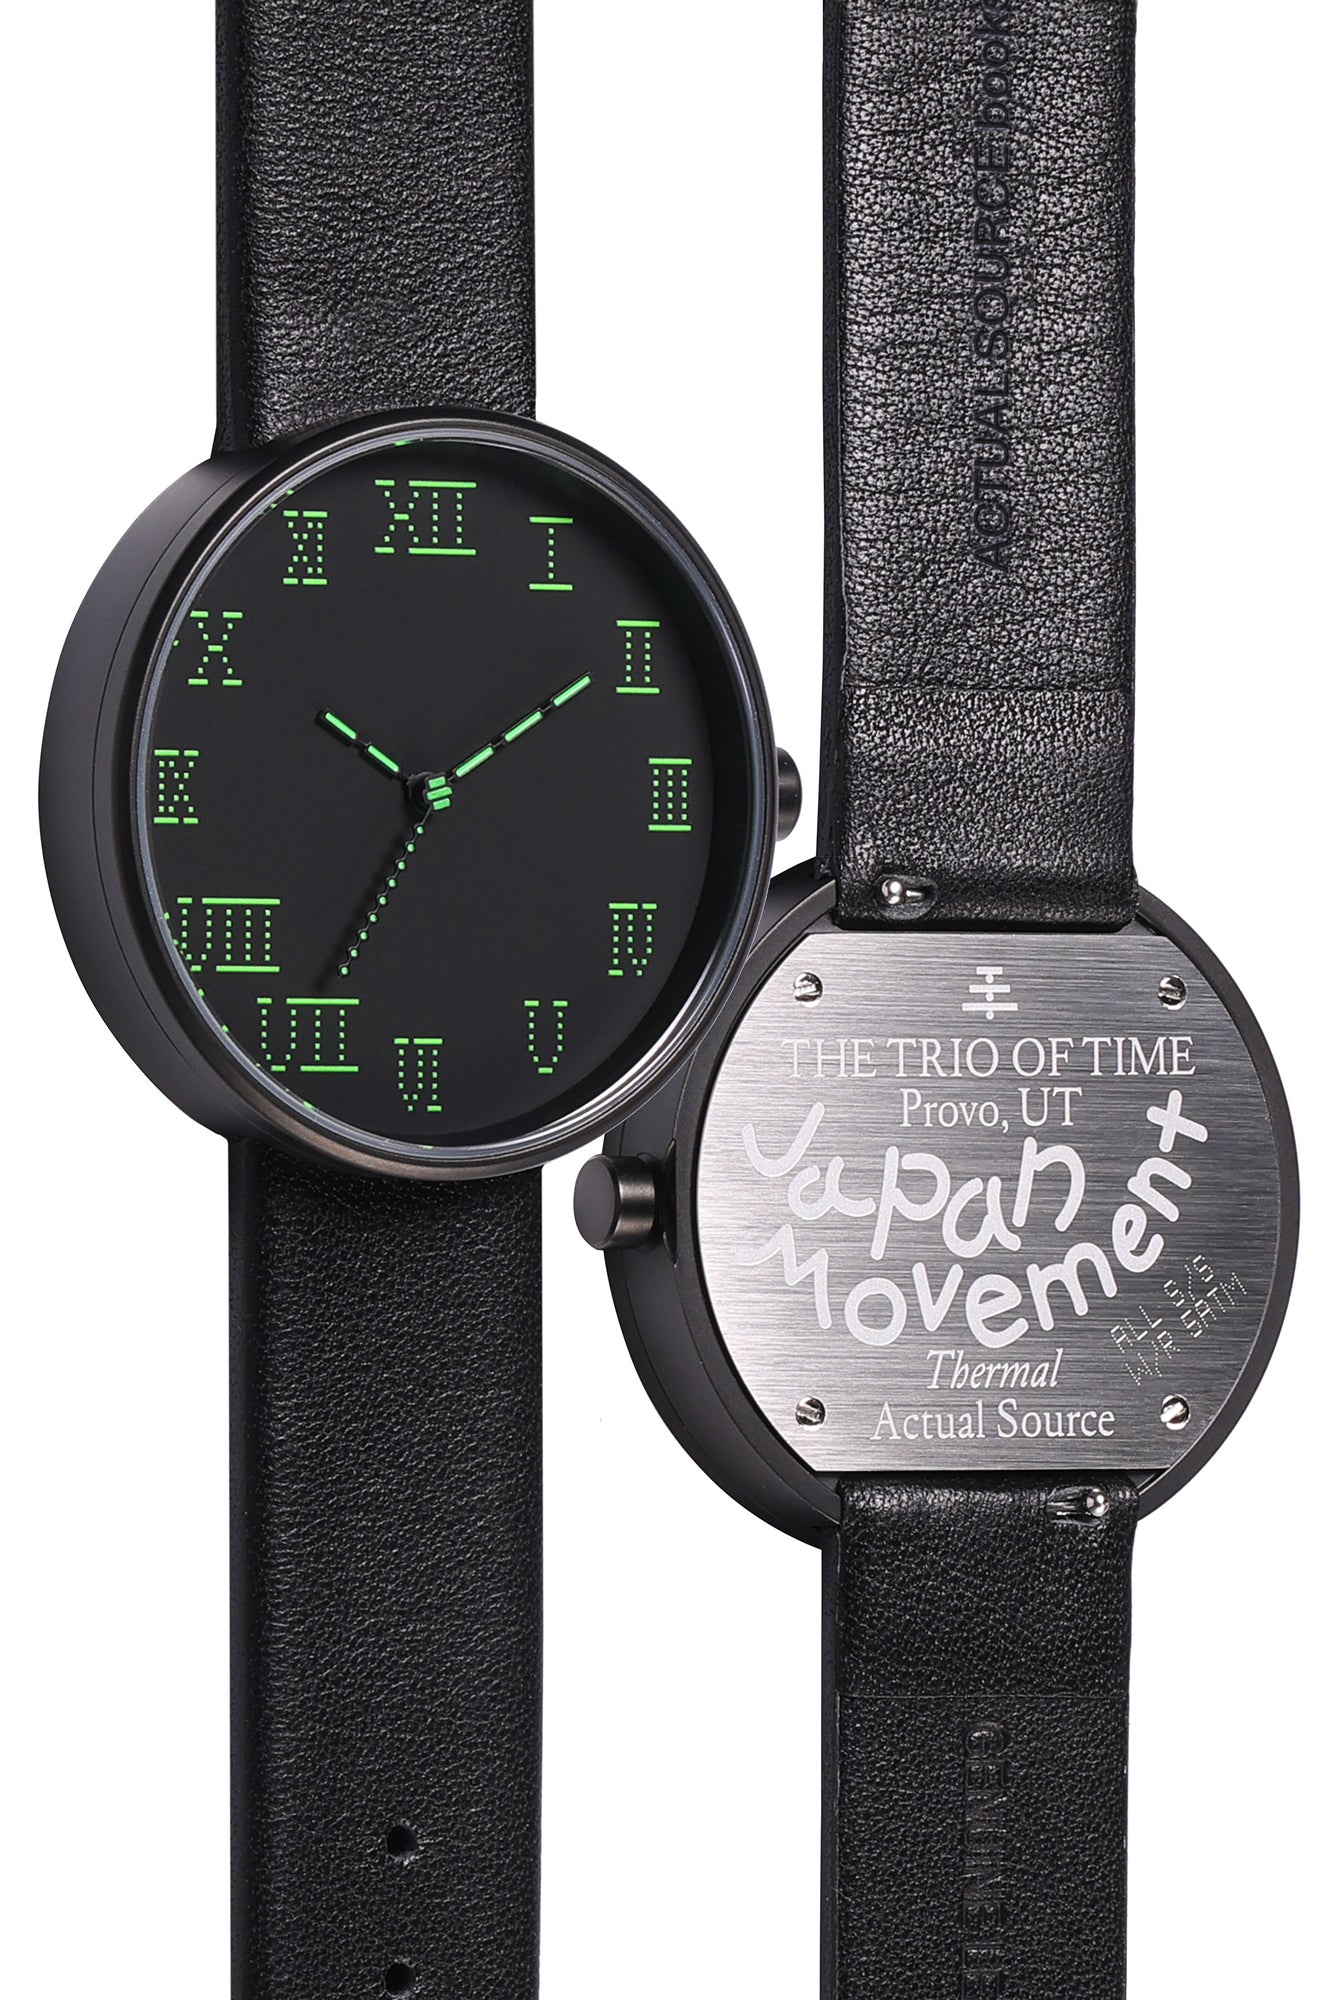 Introducing the front and back views of the TTT - ACTUAL SOURCE - THERMAL watch, presented against a clean white background.